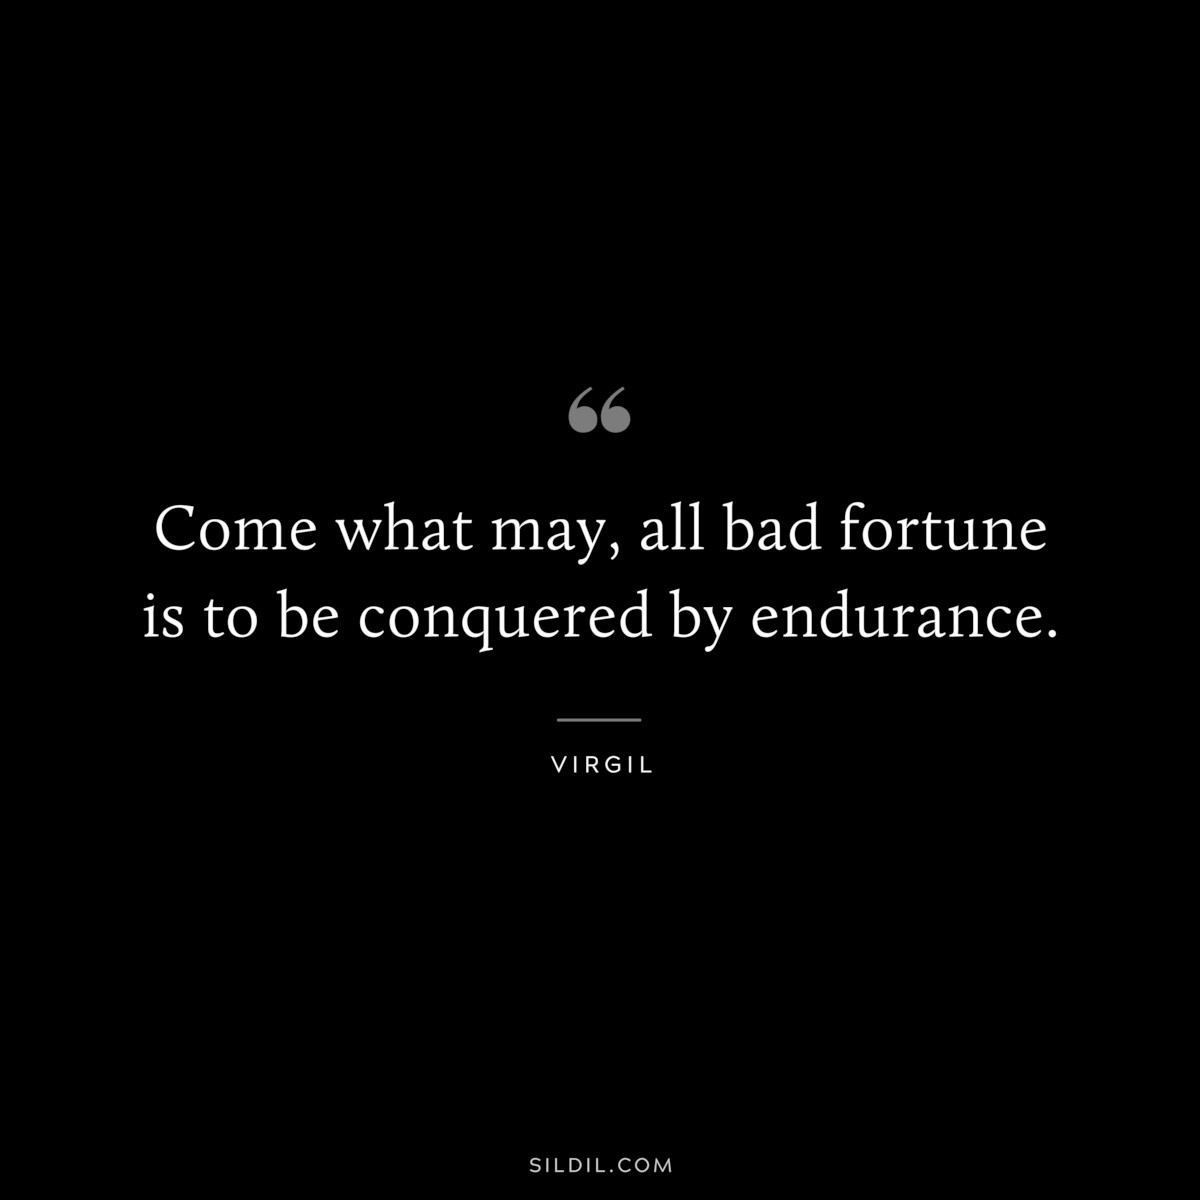 Come what may, all bad fortune is to be conquered by endurance. ― Virgil